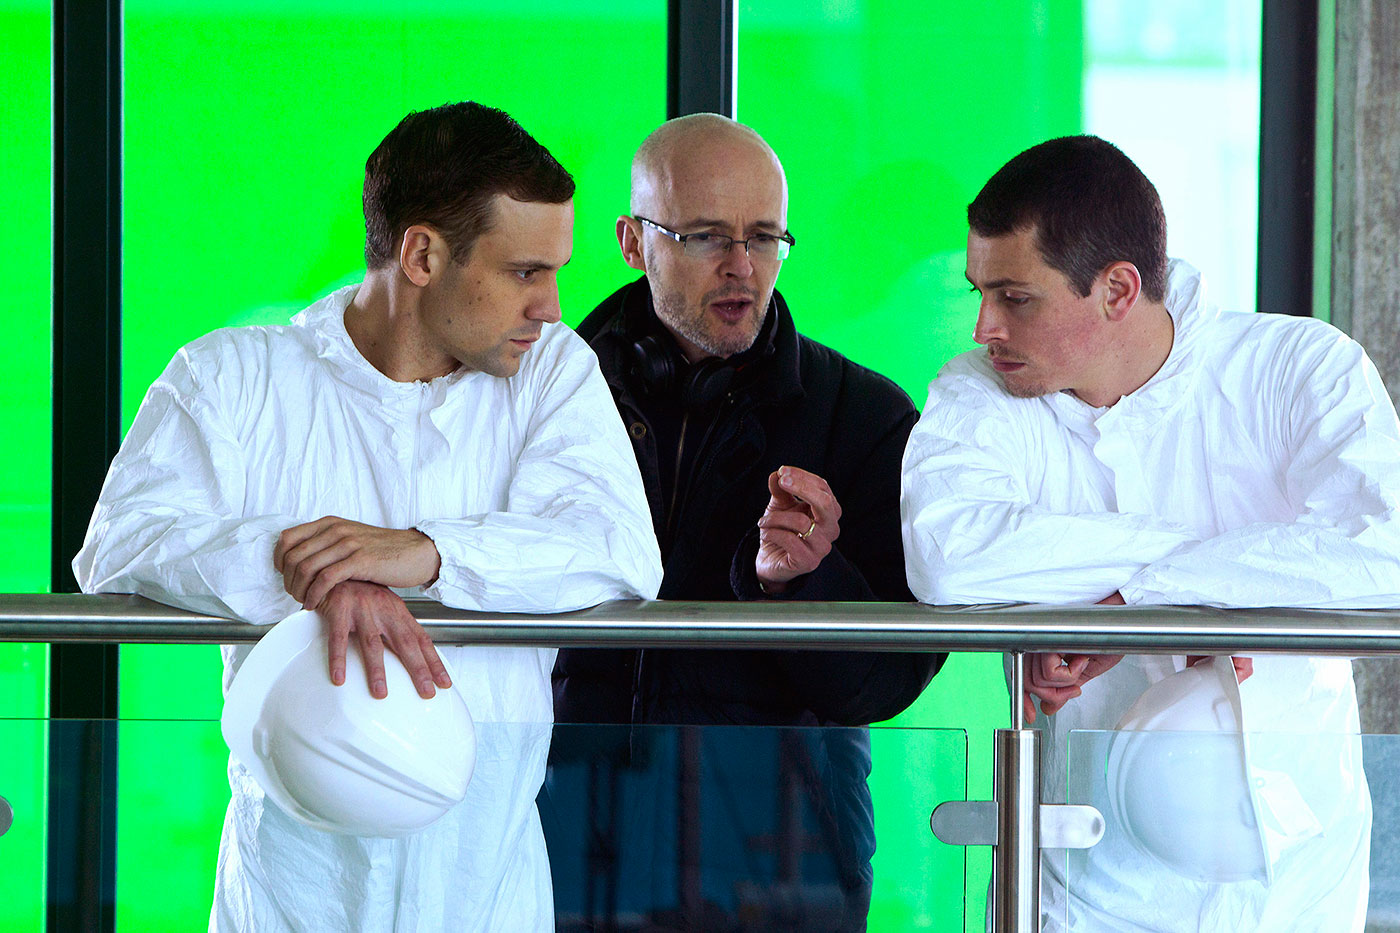 Lachlan and Nick are instructed by Simon in front of a green screen